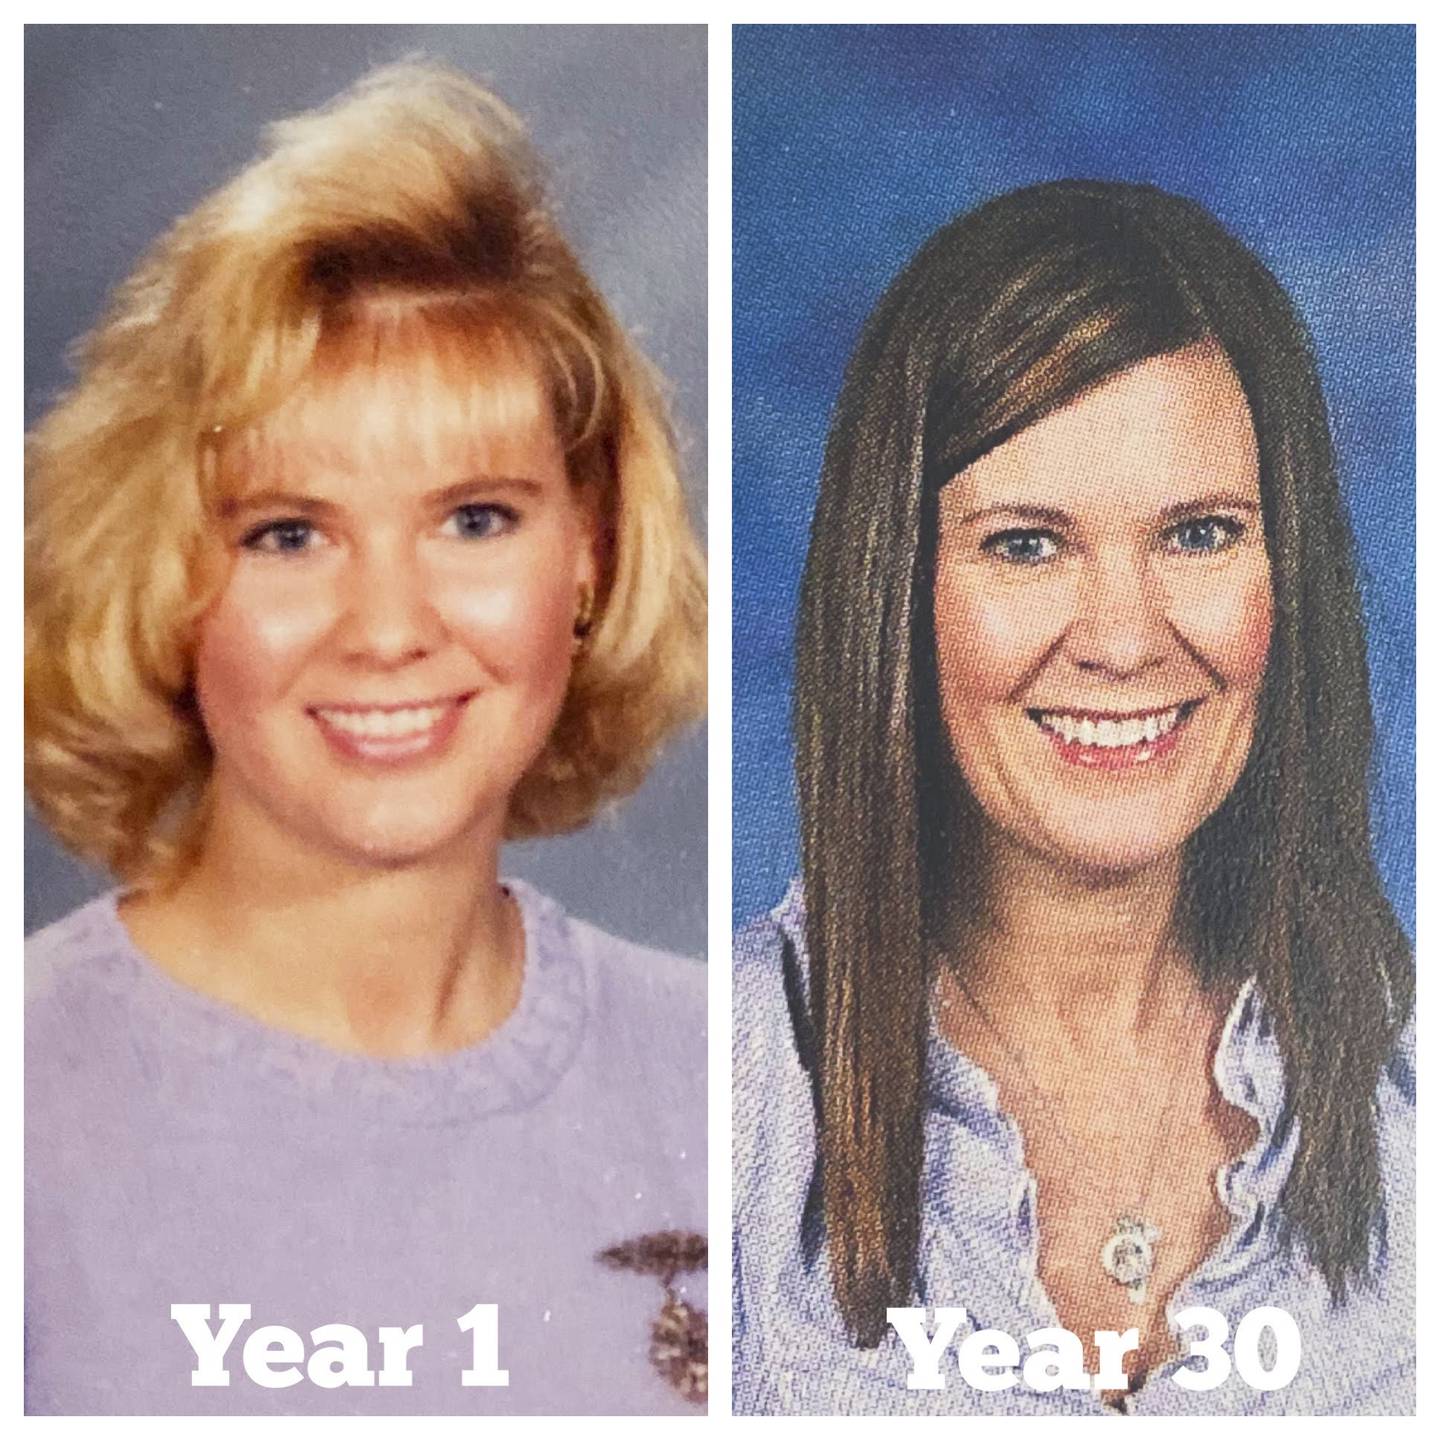 Shelly Schmidt in her first year teaching and her 30th year teaching. (Photo Provided)